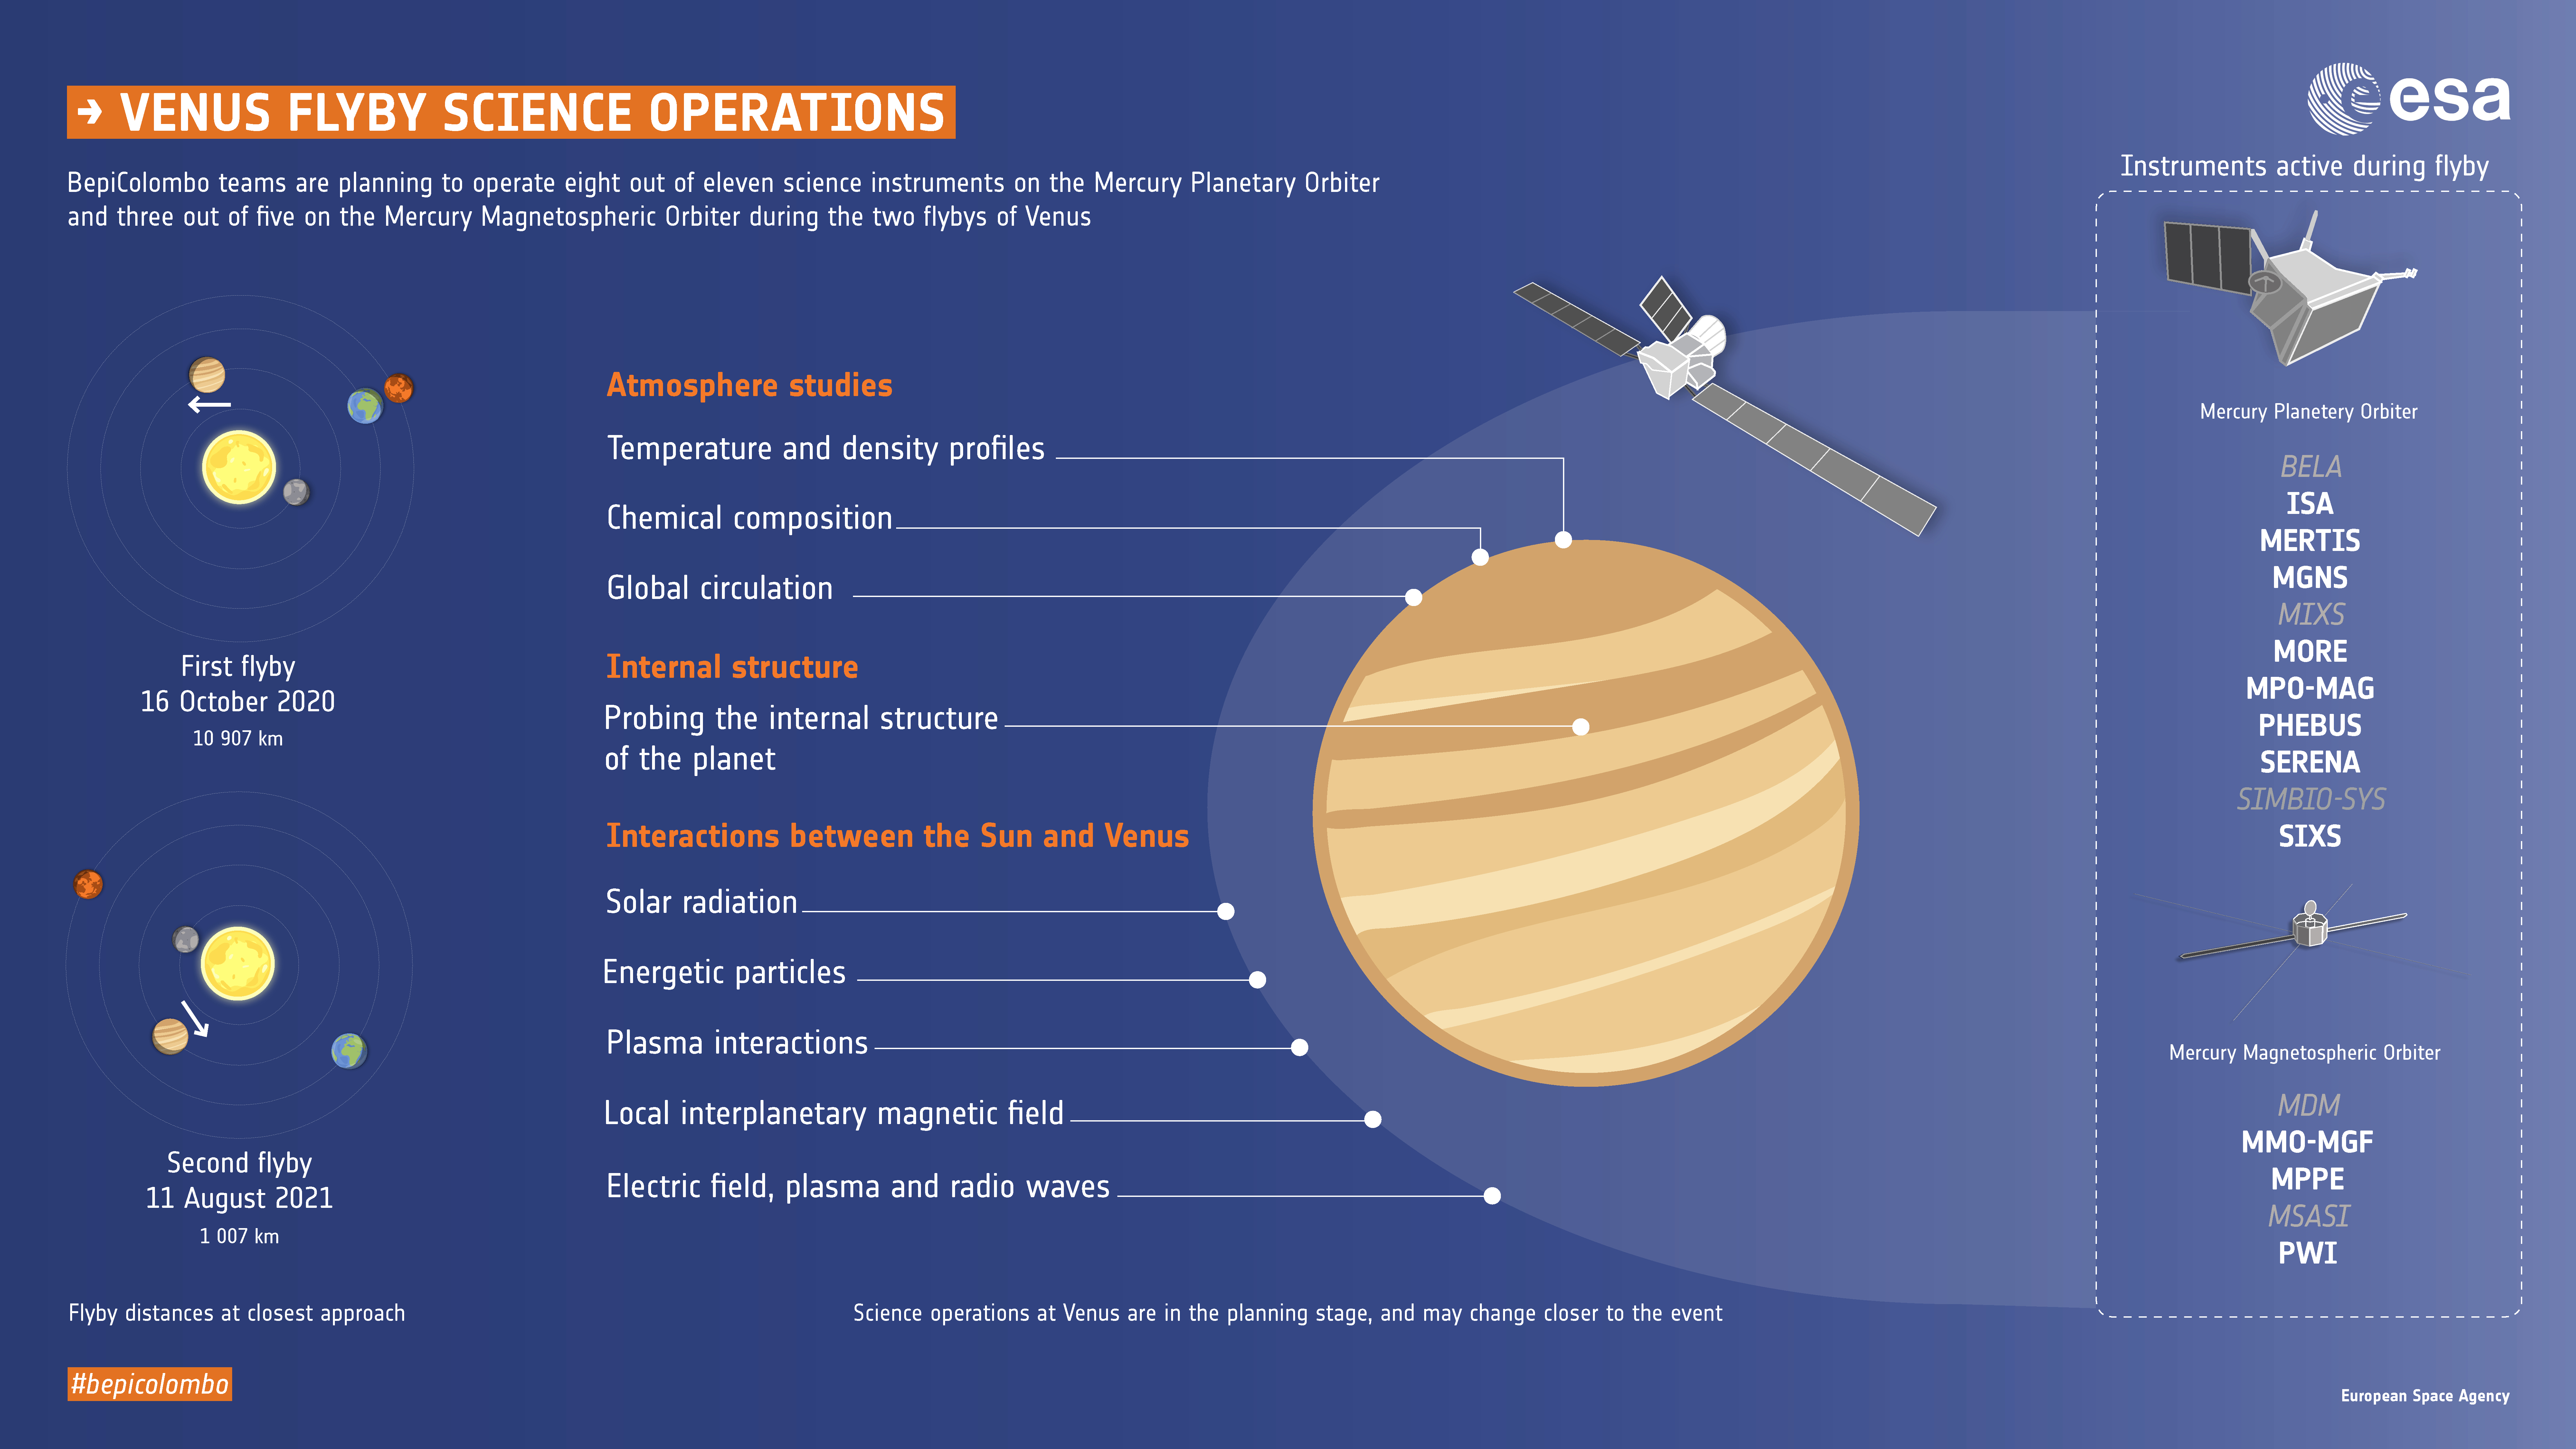 The orbiters will be able to operate or partially operate some of their instruments during the cruise phase, affording unique opportunities to collect scientifically valuable data at Venus, for example. Moreover, some of the instruments designed to study Mercury in a particular way, can be used in a completely different way at Venus – the main difference being that Venus has a thick atmosphere while Mercury does not.